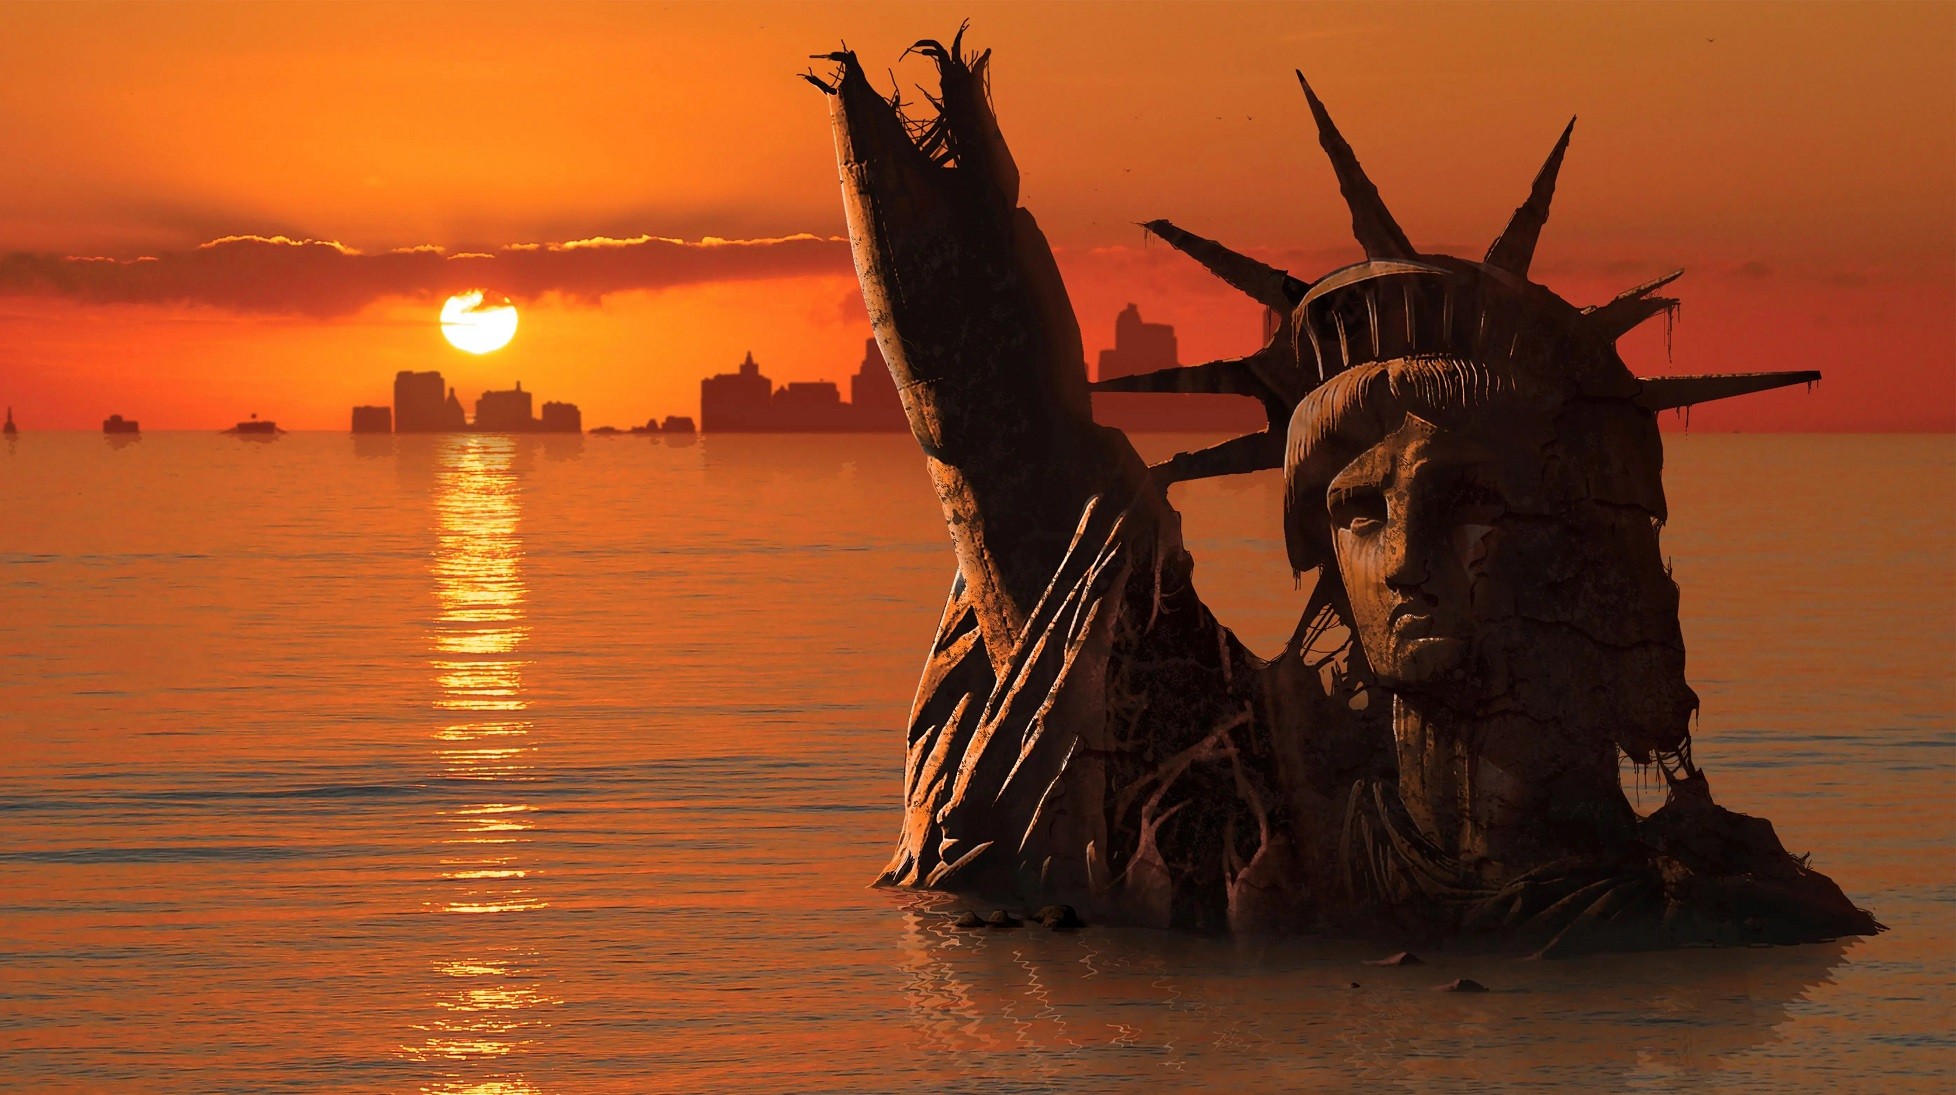 statute of liberty destroyed 2